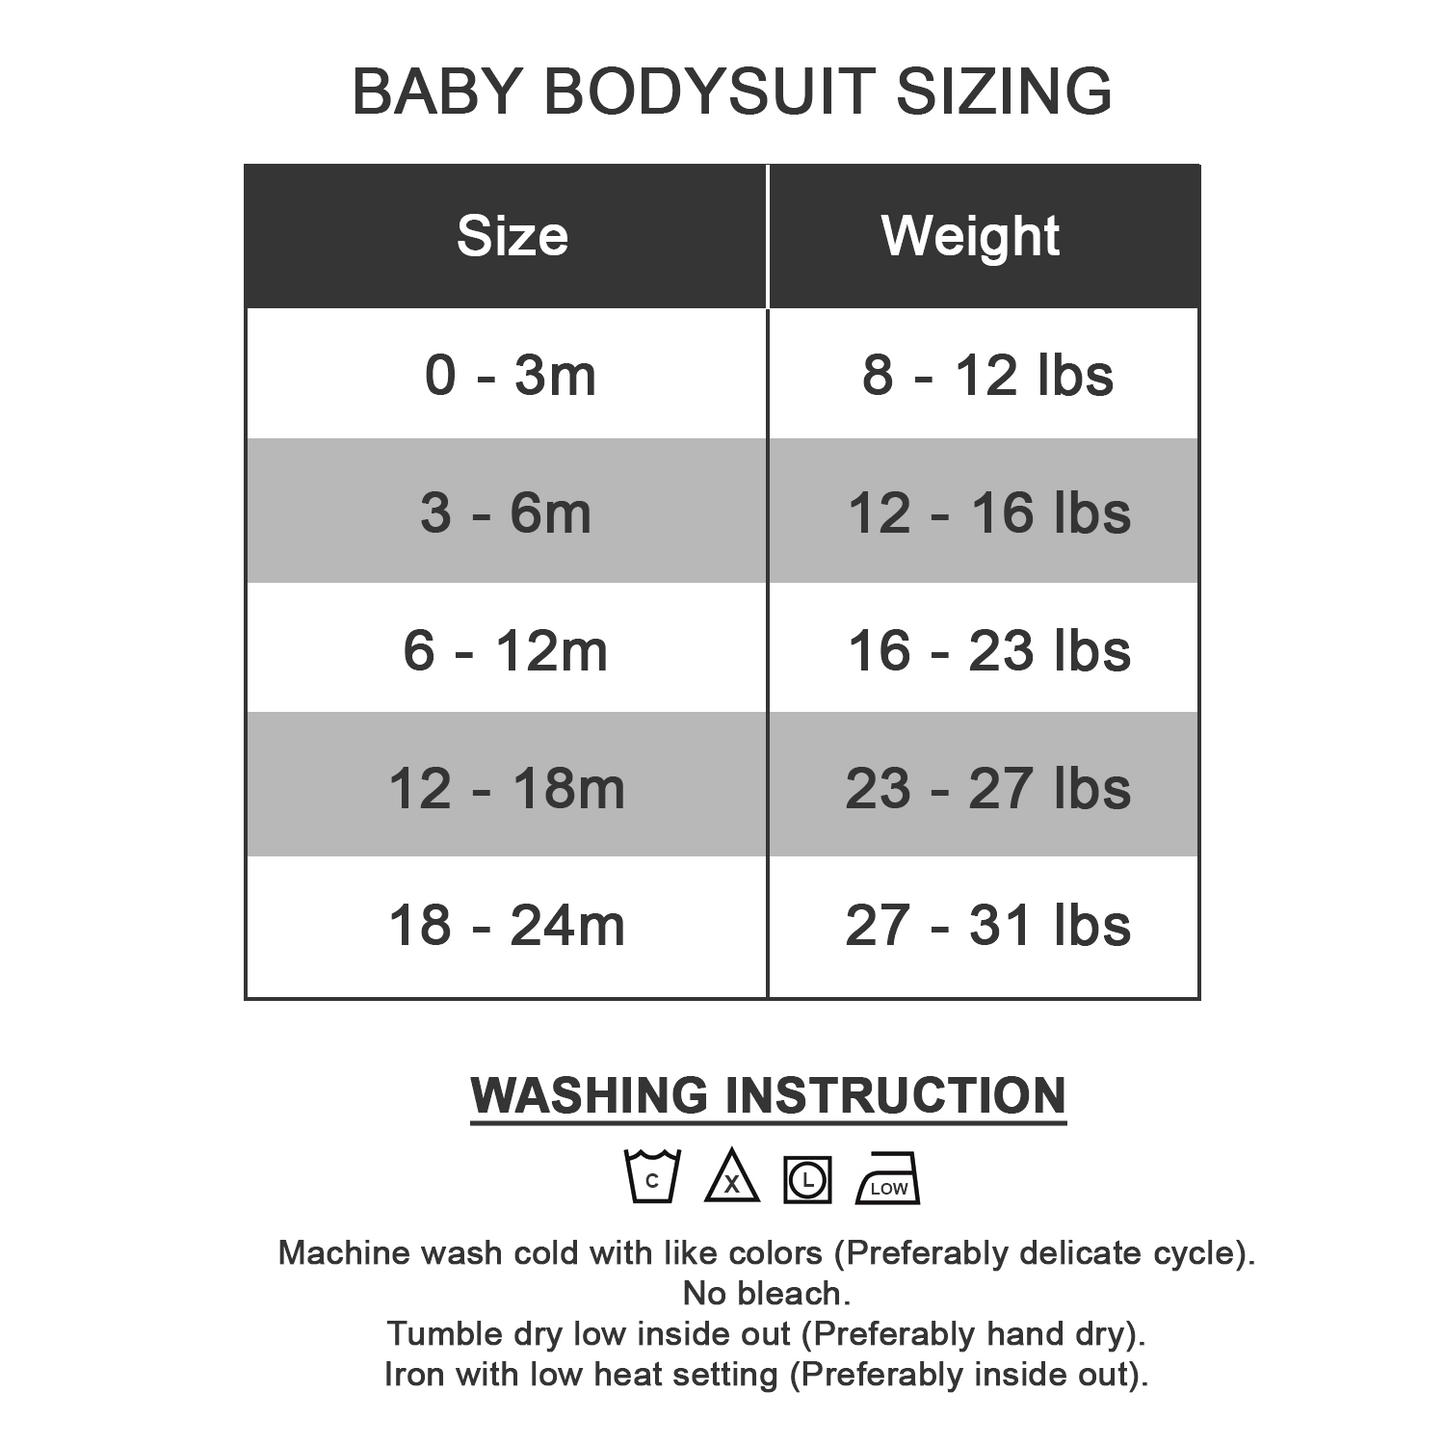 Endanzoo Organic Baby Bodysuit - Sweeter than Canada Maple Syrup